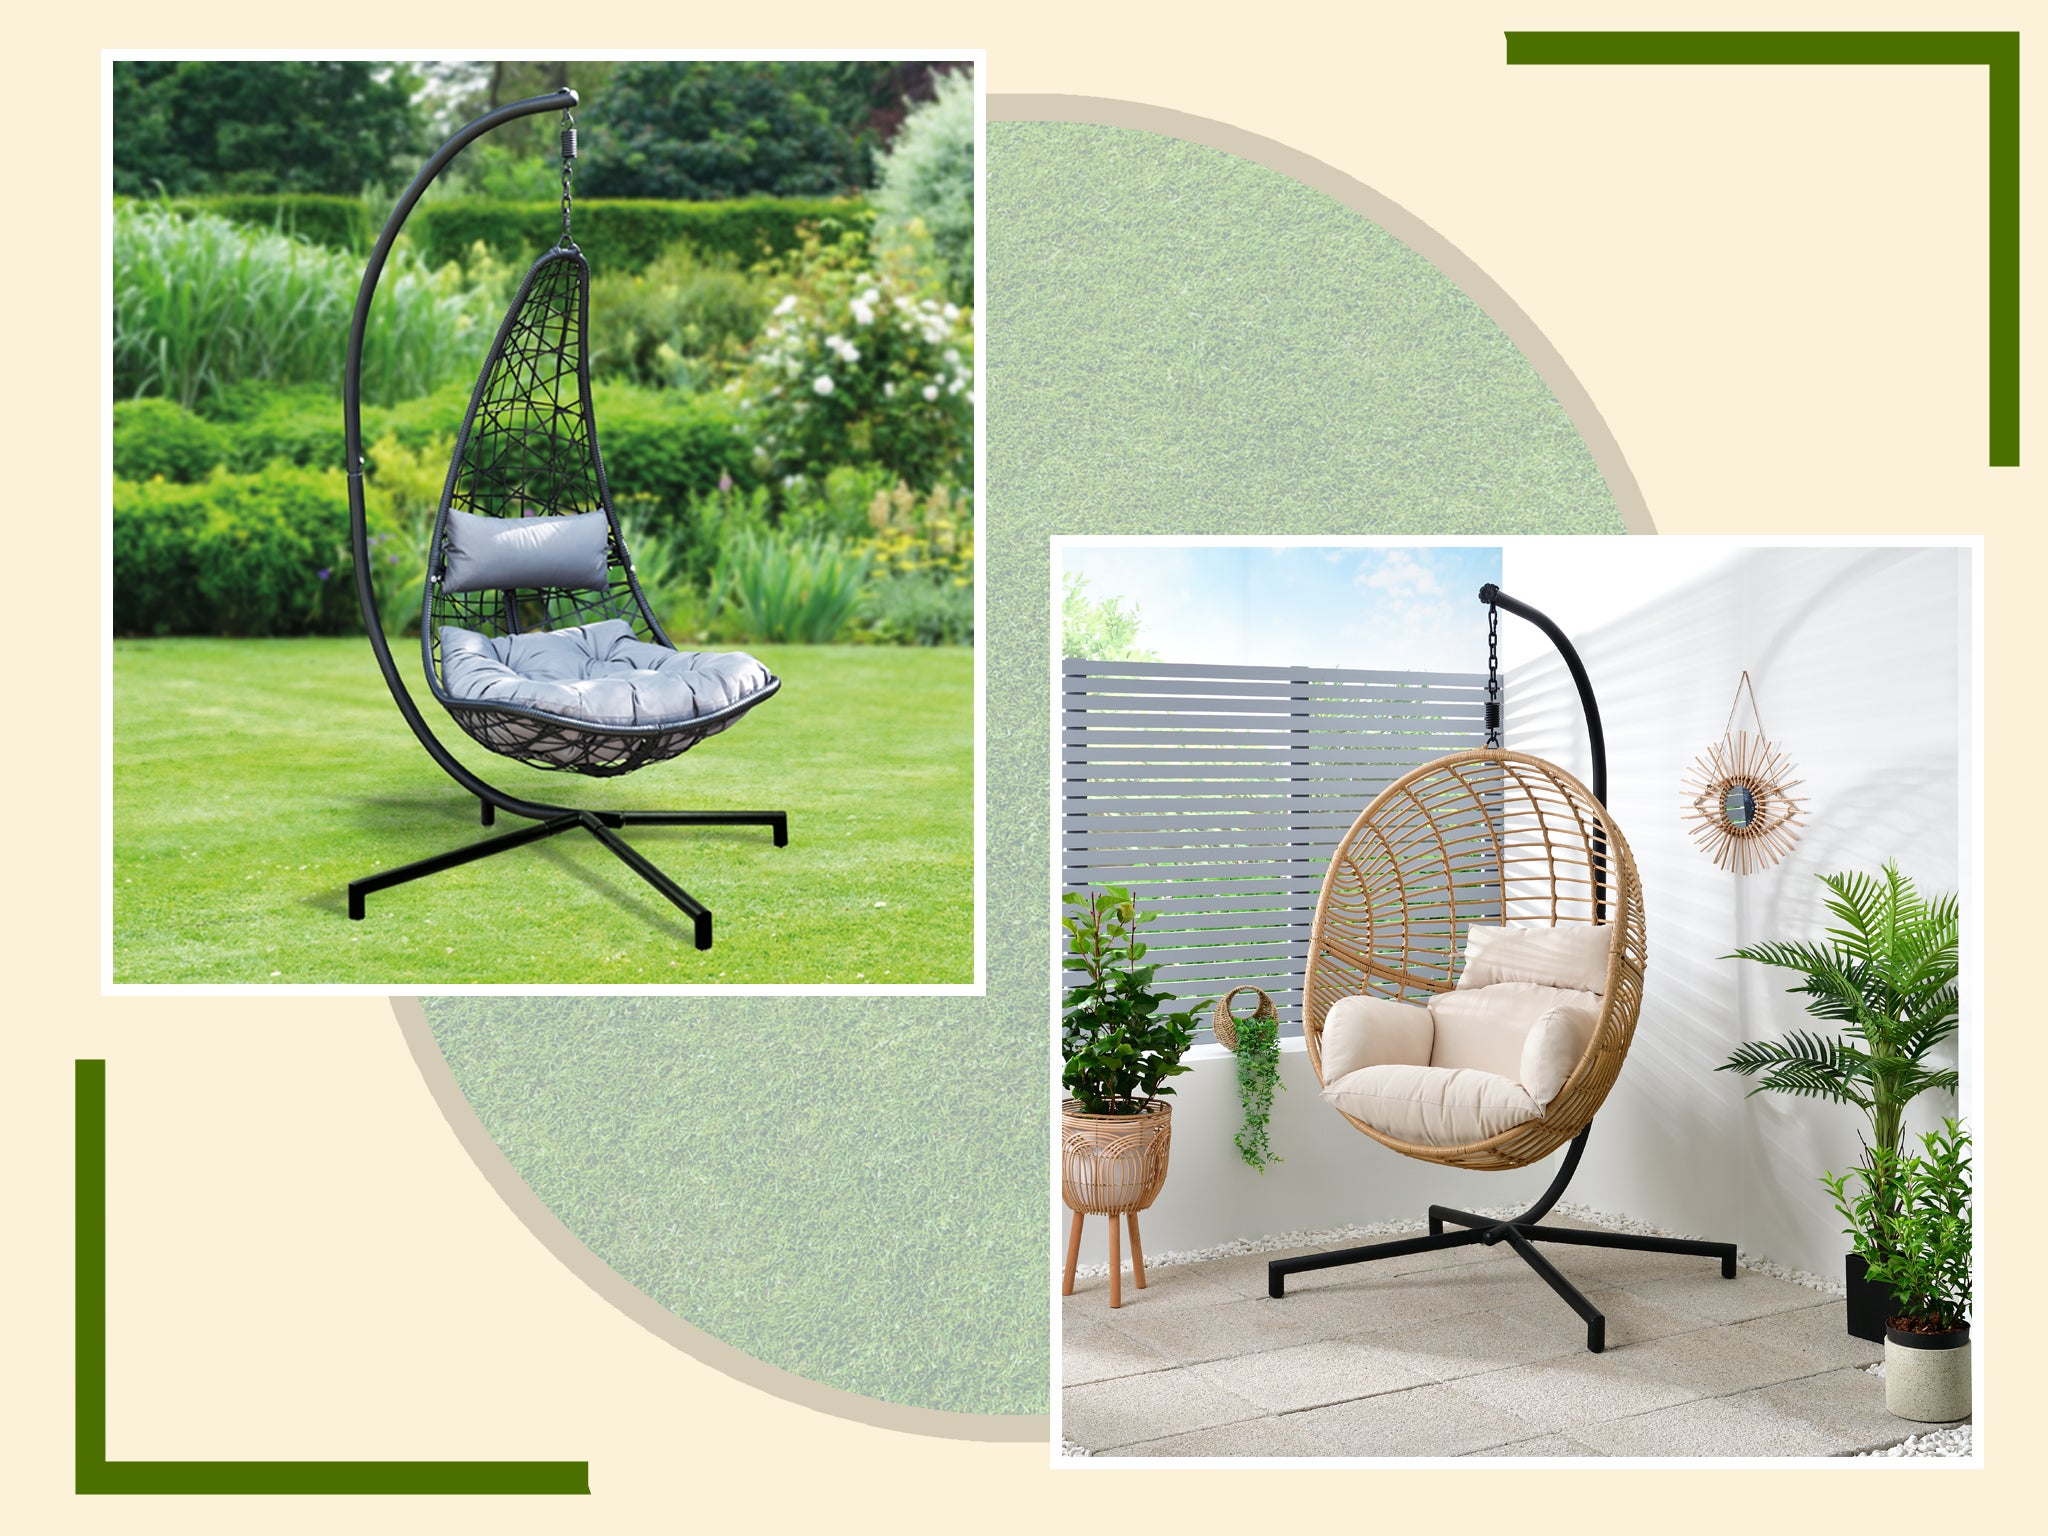 Give your garden a stylish upgrade just in time for spring